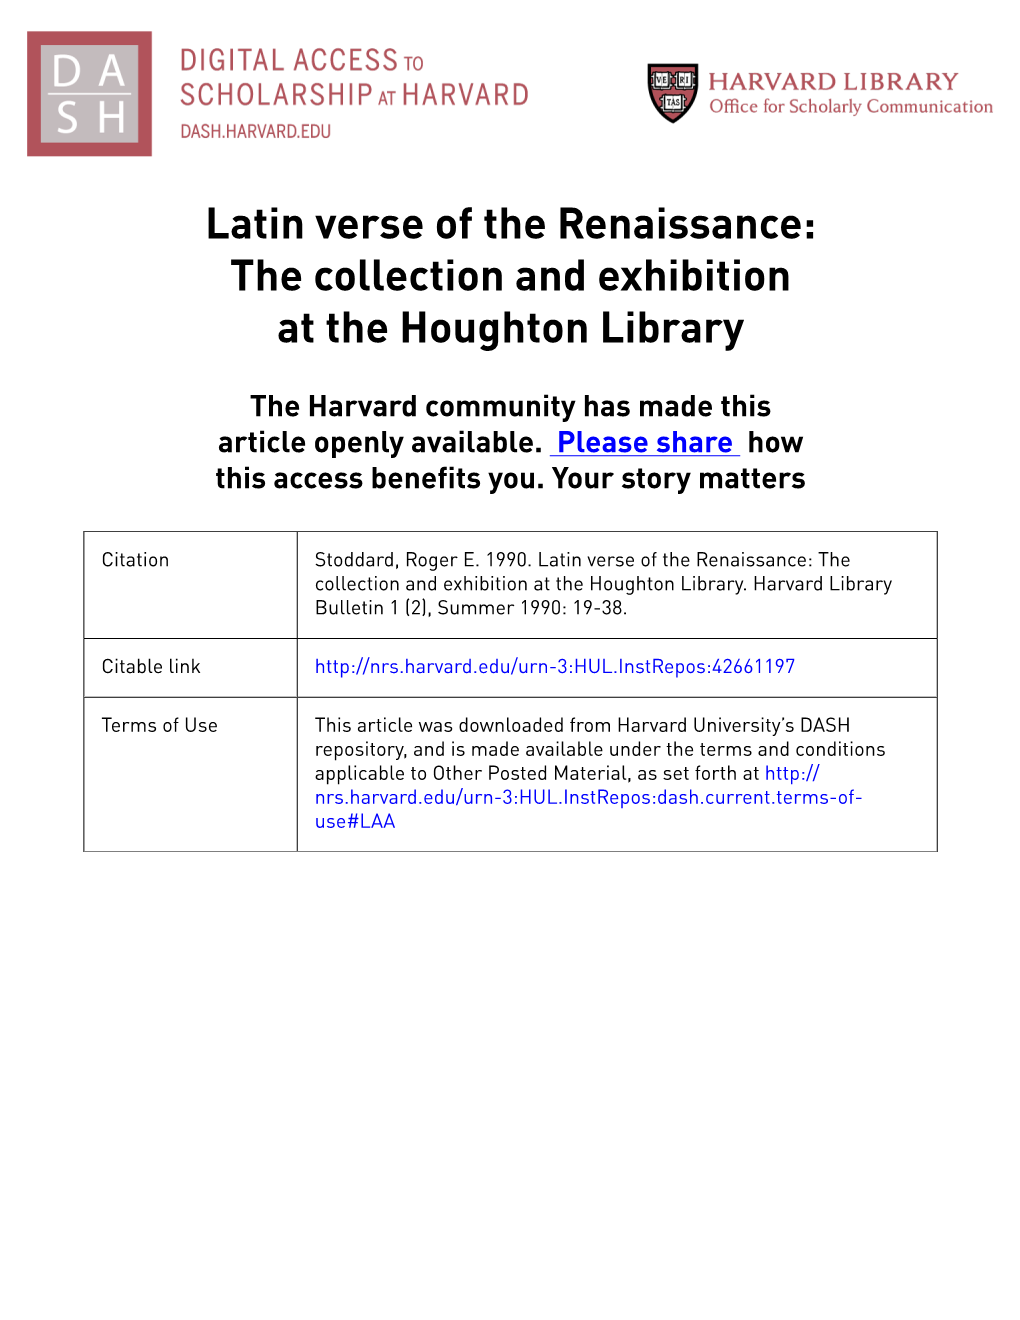 Latin Verse of the Renaissance: the Collection and Exhibition at the Houghton Library